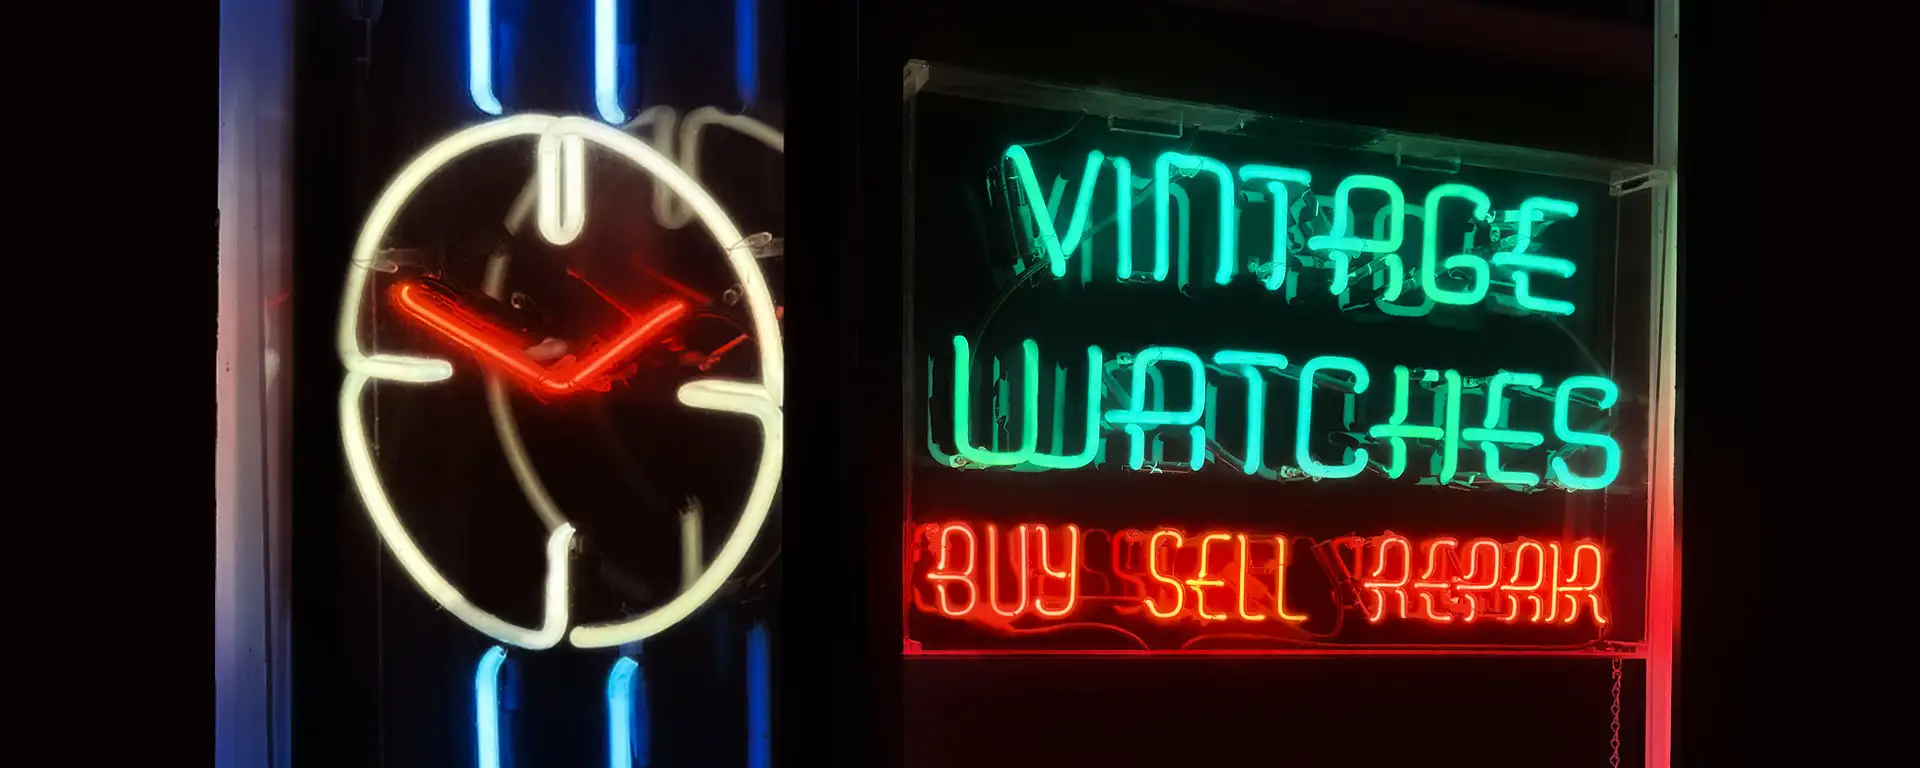 Buy Sell Repair Vintage Watches Neon Signs In Front Window